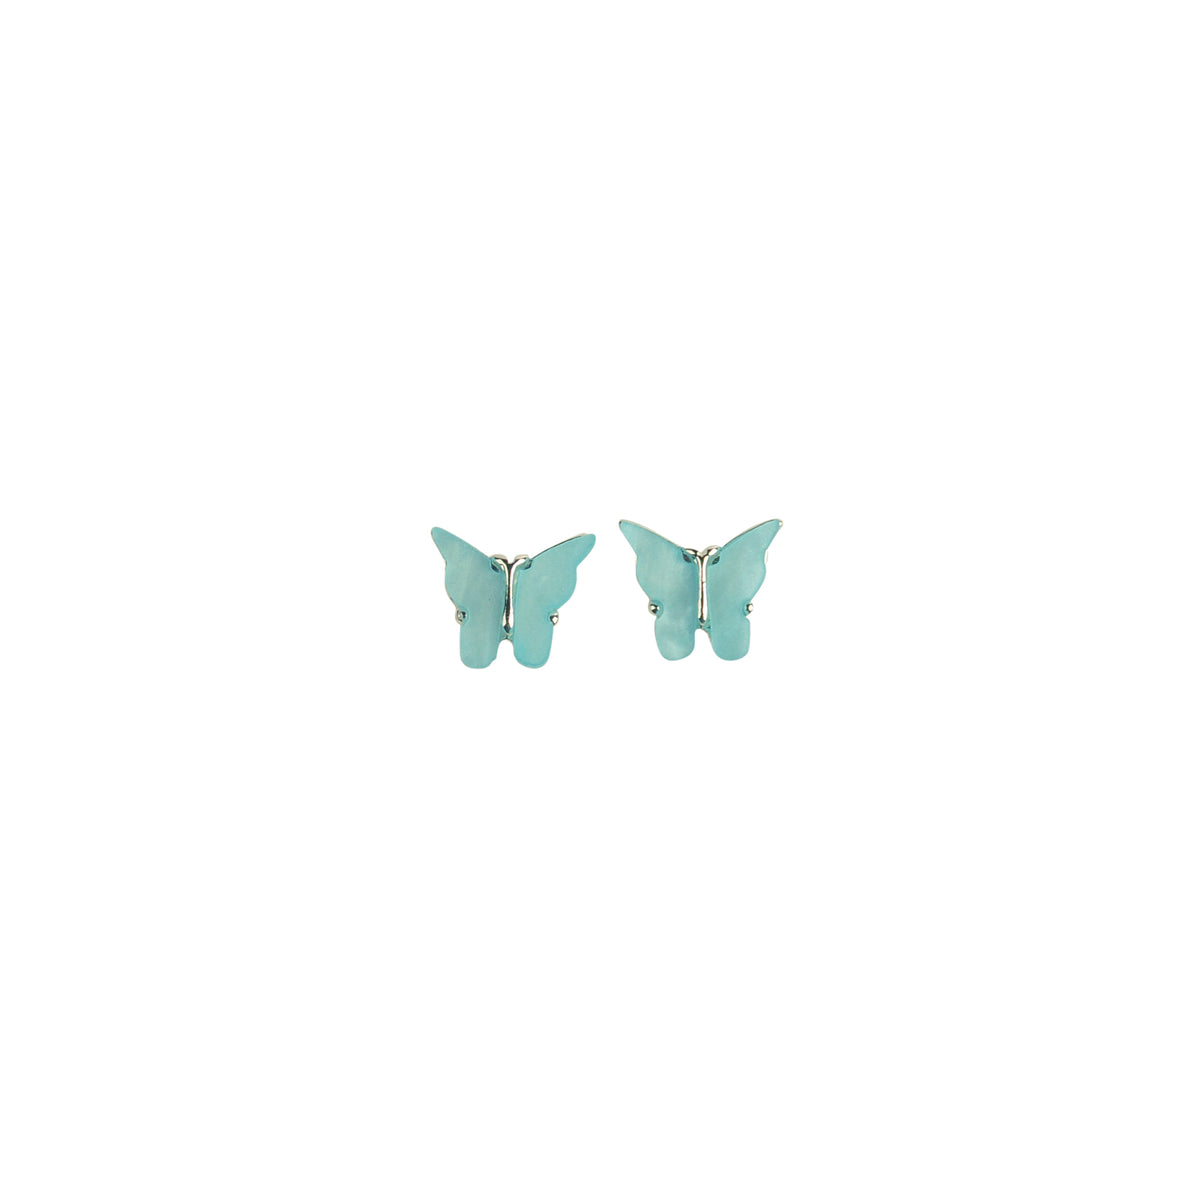 Colorful Acrylic Butterfly Earring Studs